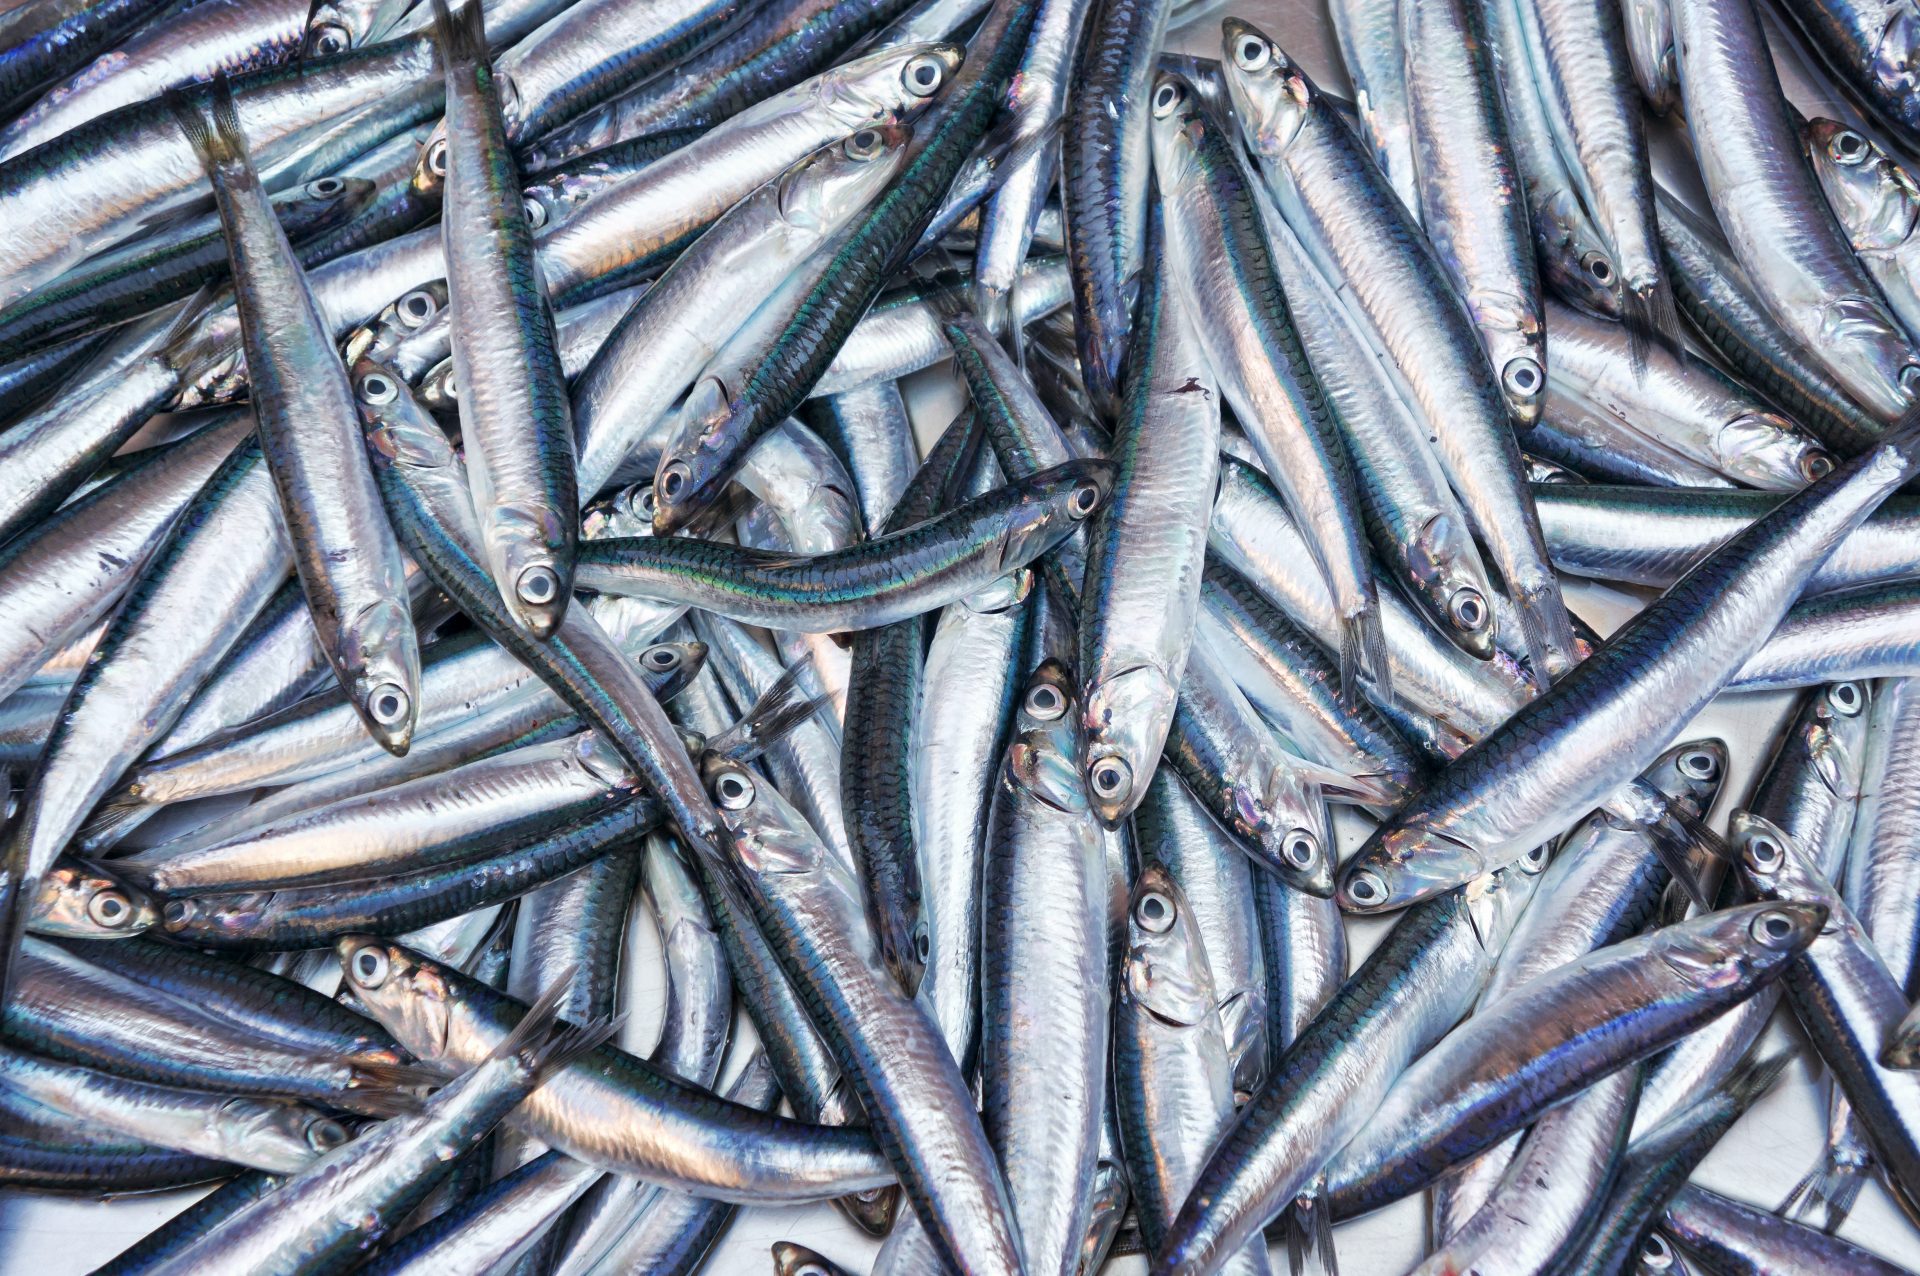 fresh anchovies are an example of sustainable seafood